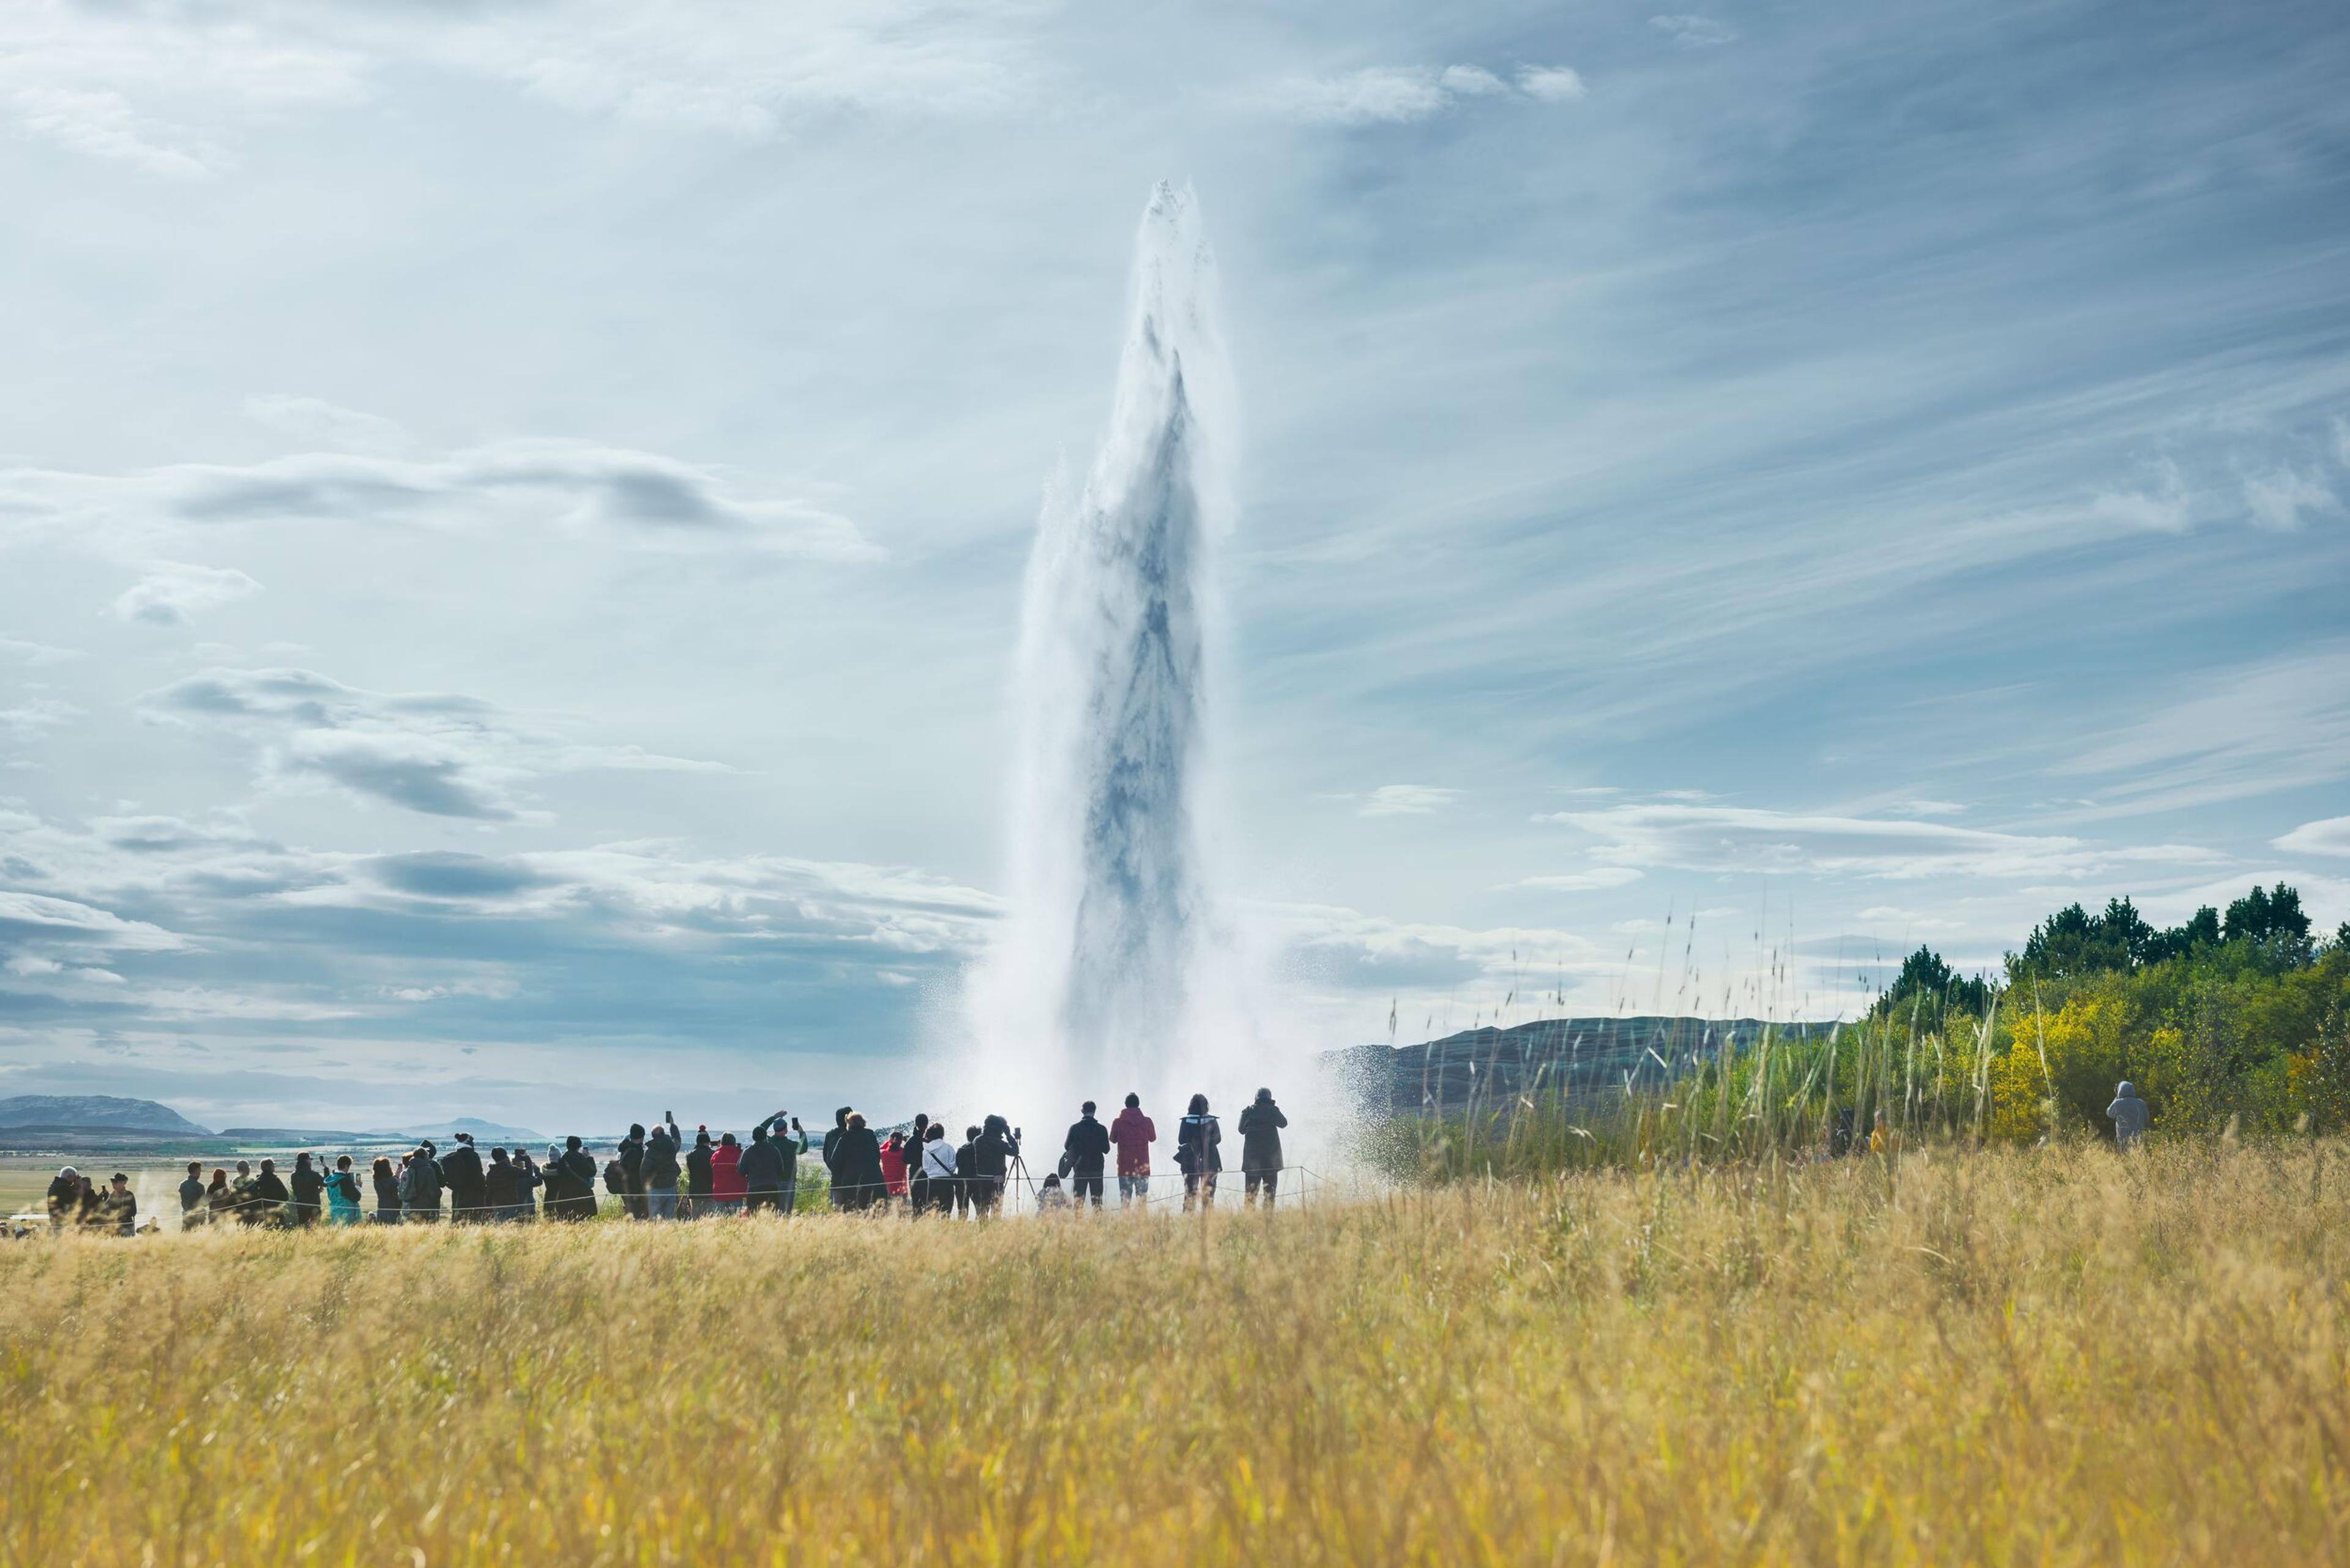 A crowd of onlookers gathered in a golden field witnessing a high geyser eruption, with the jet of water rising dramatically against a backdrop of clear skies and distant hills.